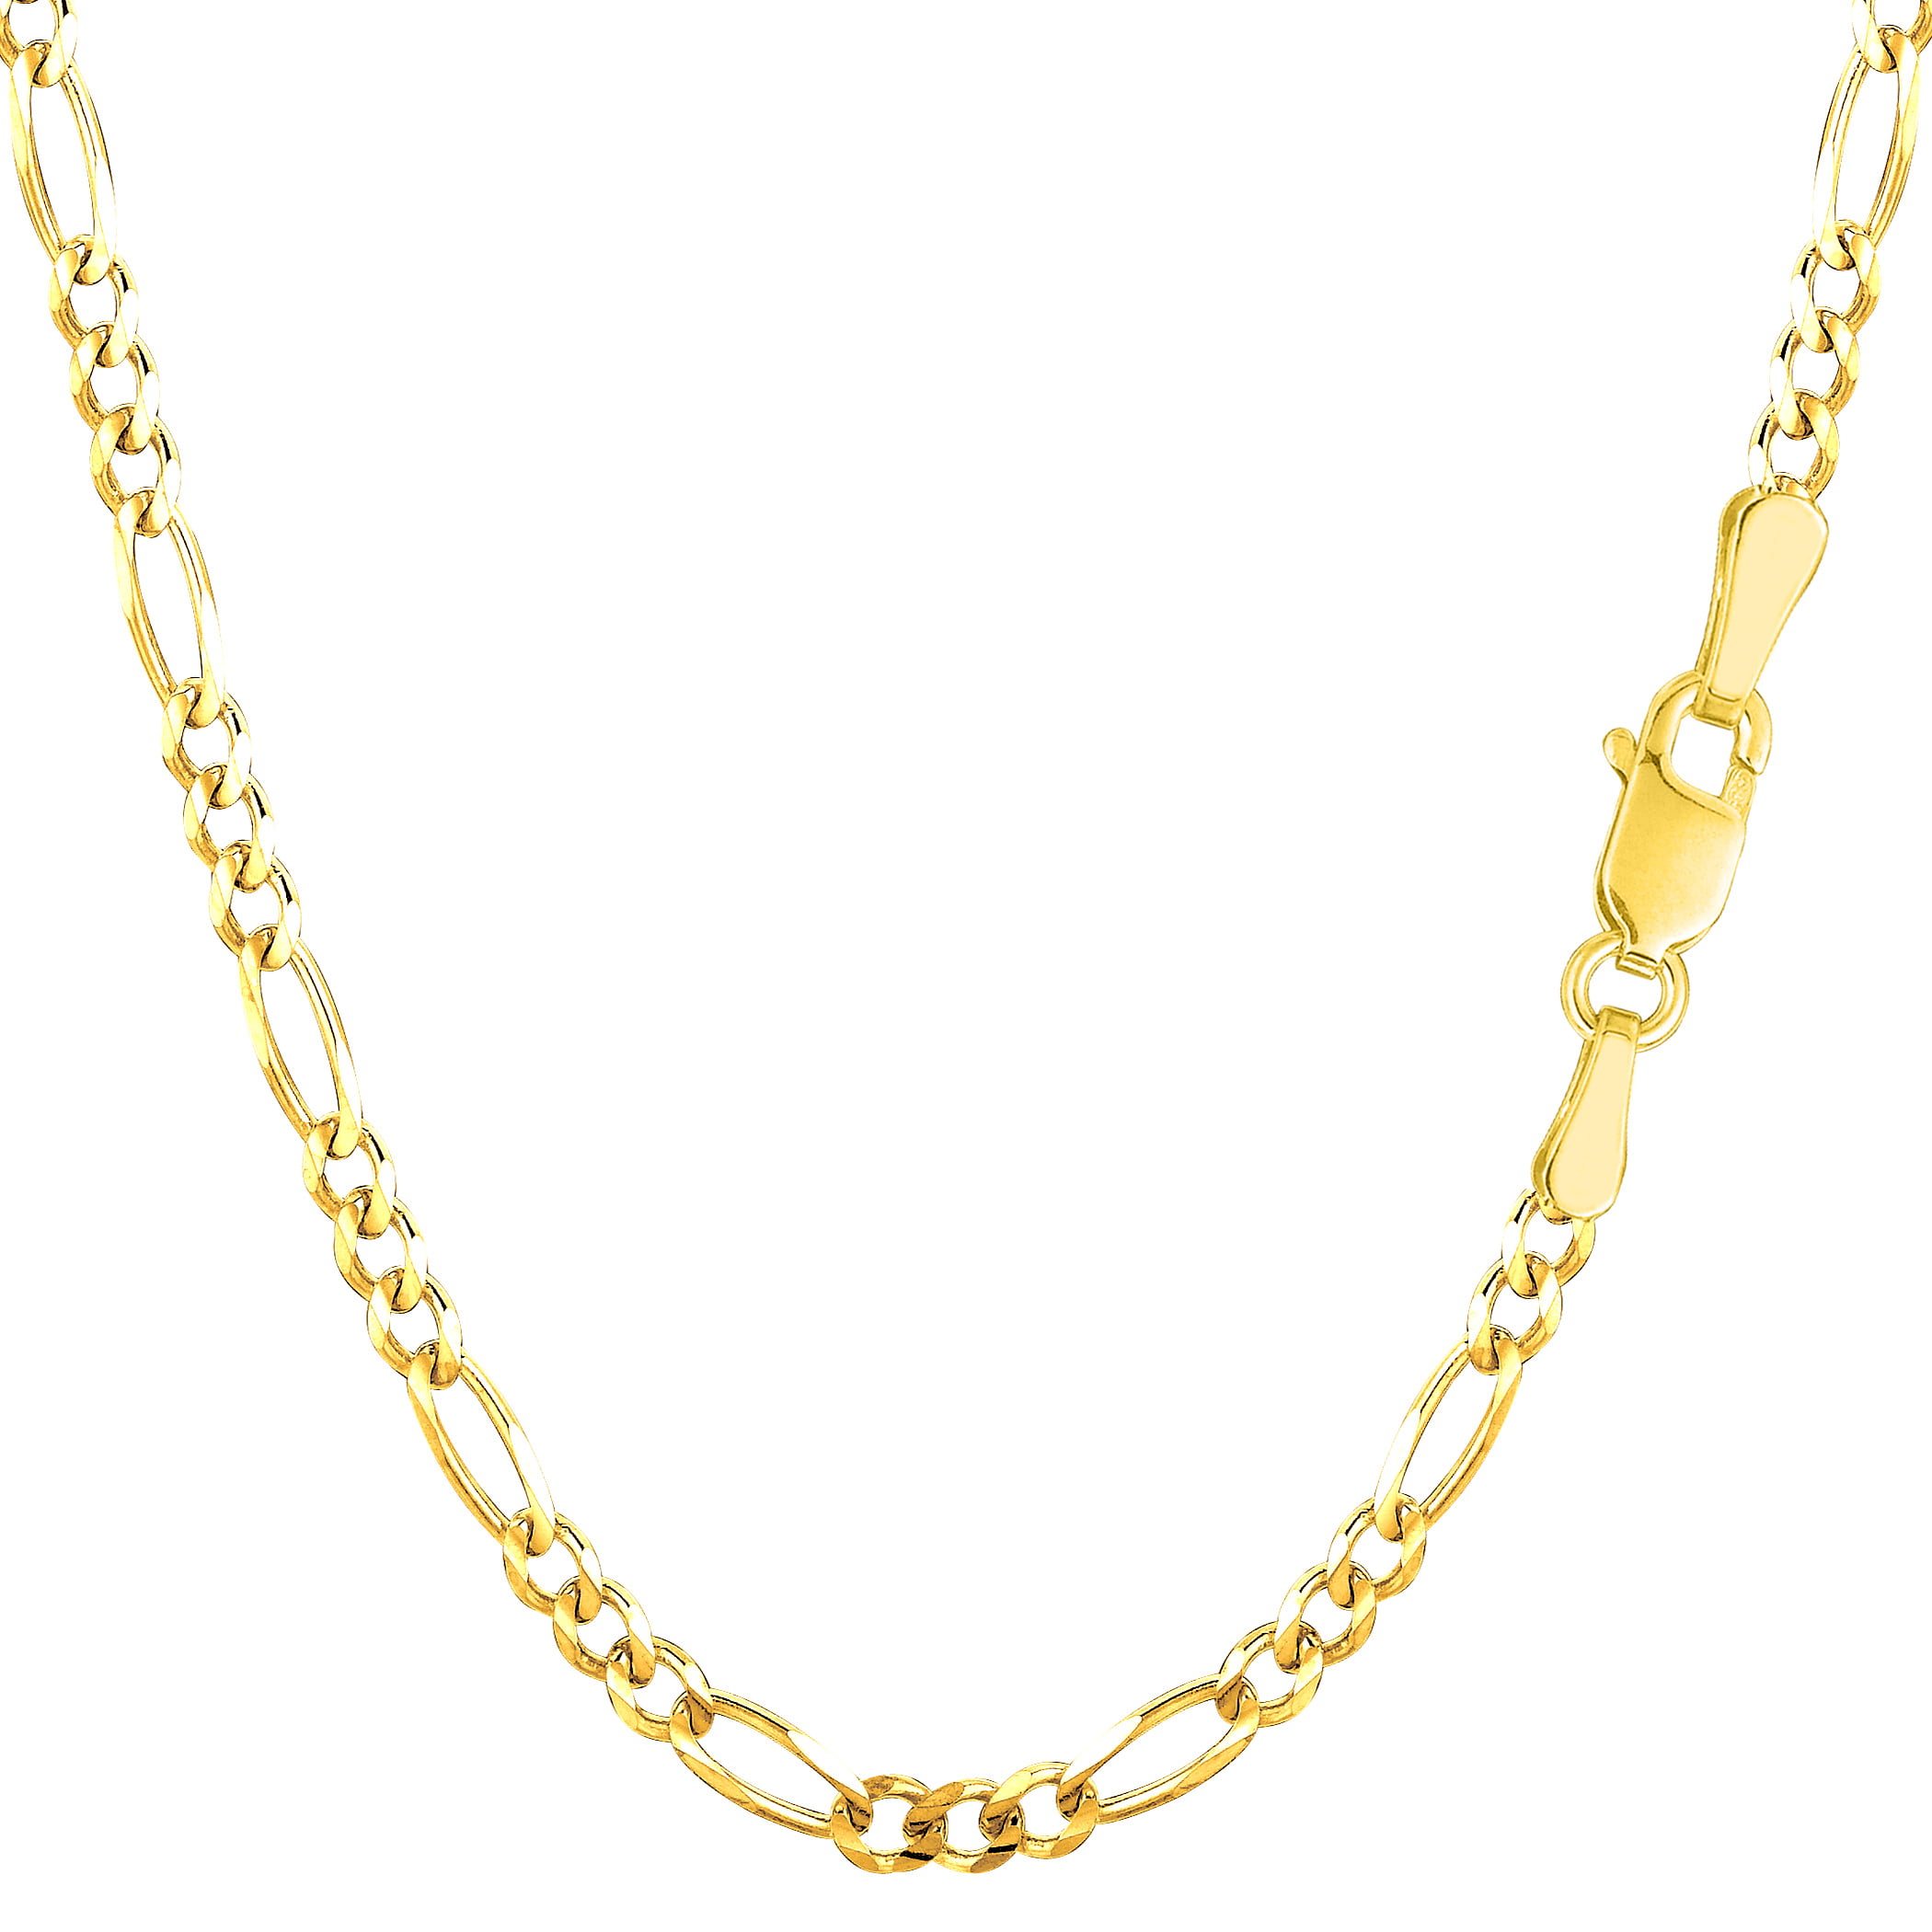 10k Semi solid Rope Chain Bracelet Jewelry Gifts for Women in Yellow Gold Choice of Lengths 7 8 and 2.8mm 3mm 4.25mm 